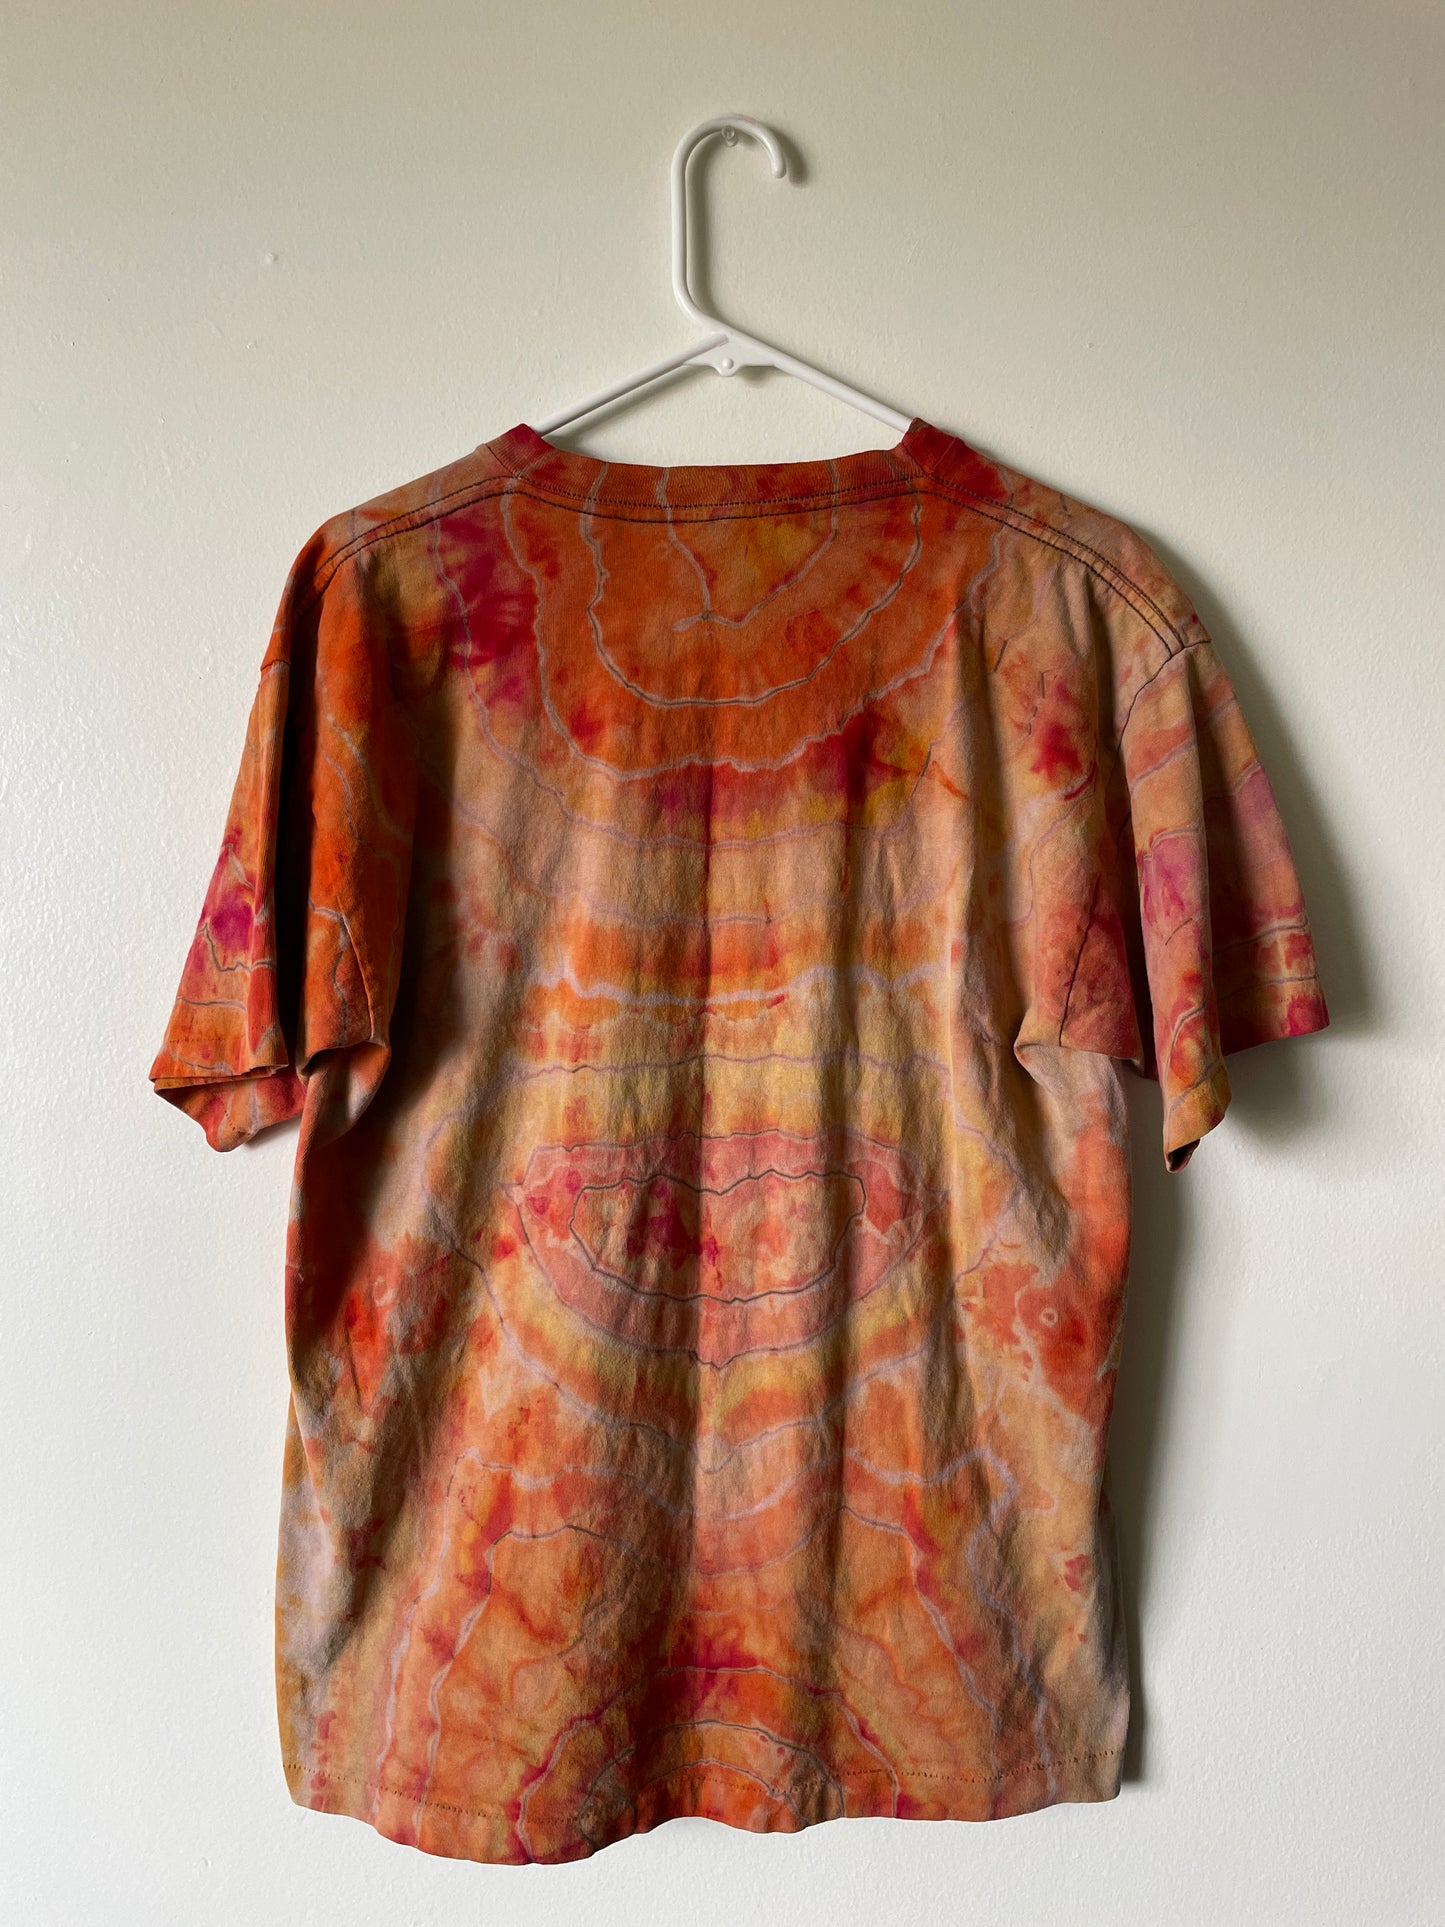 Large Men's Vintage Black Hills End of the Trail Handmade Geode Tie Dye Short Sleeve T-Shirt | One-Of-a-Kind Upcycled Brown and Orange Tie Dye Top